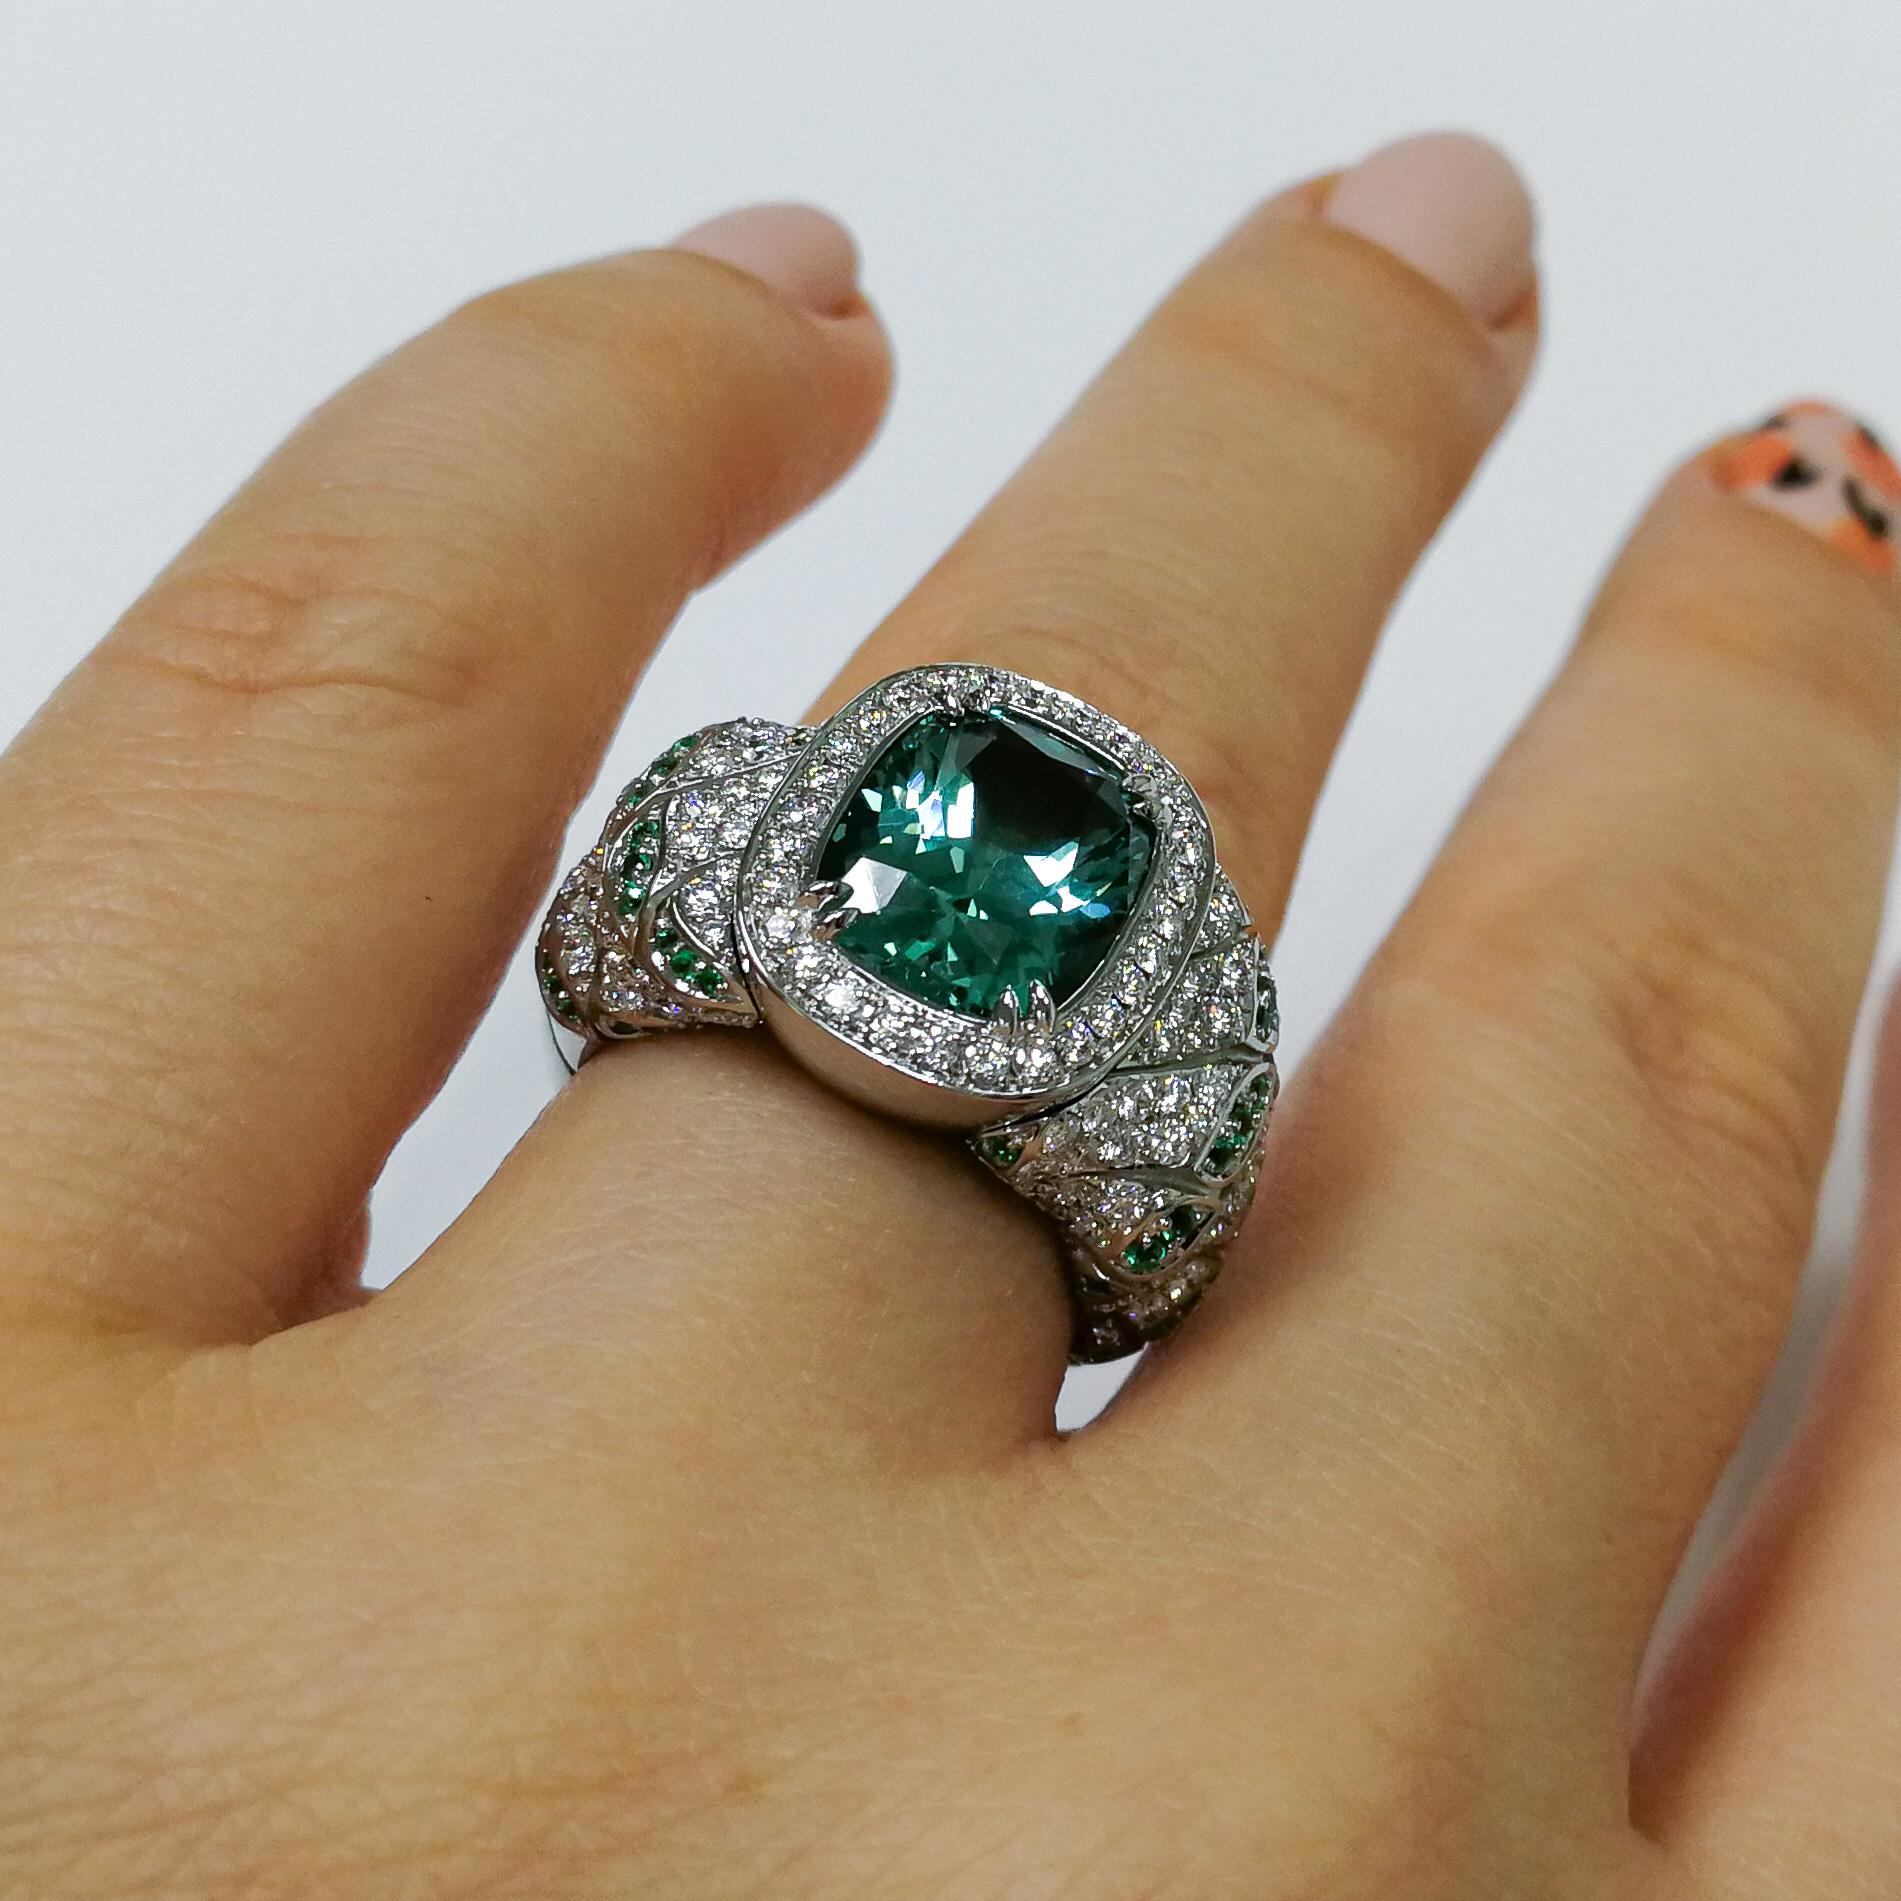 Lagoon Tourmaline Diamonds Emeralds 18 Karat White Gold Small DNA Suite
In the shape of this Suite, you probably already guessed that when they were created, our designers were inspired by the structure of human DNA. What could be more perfect? But